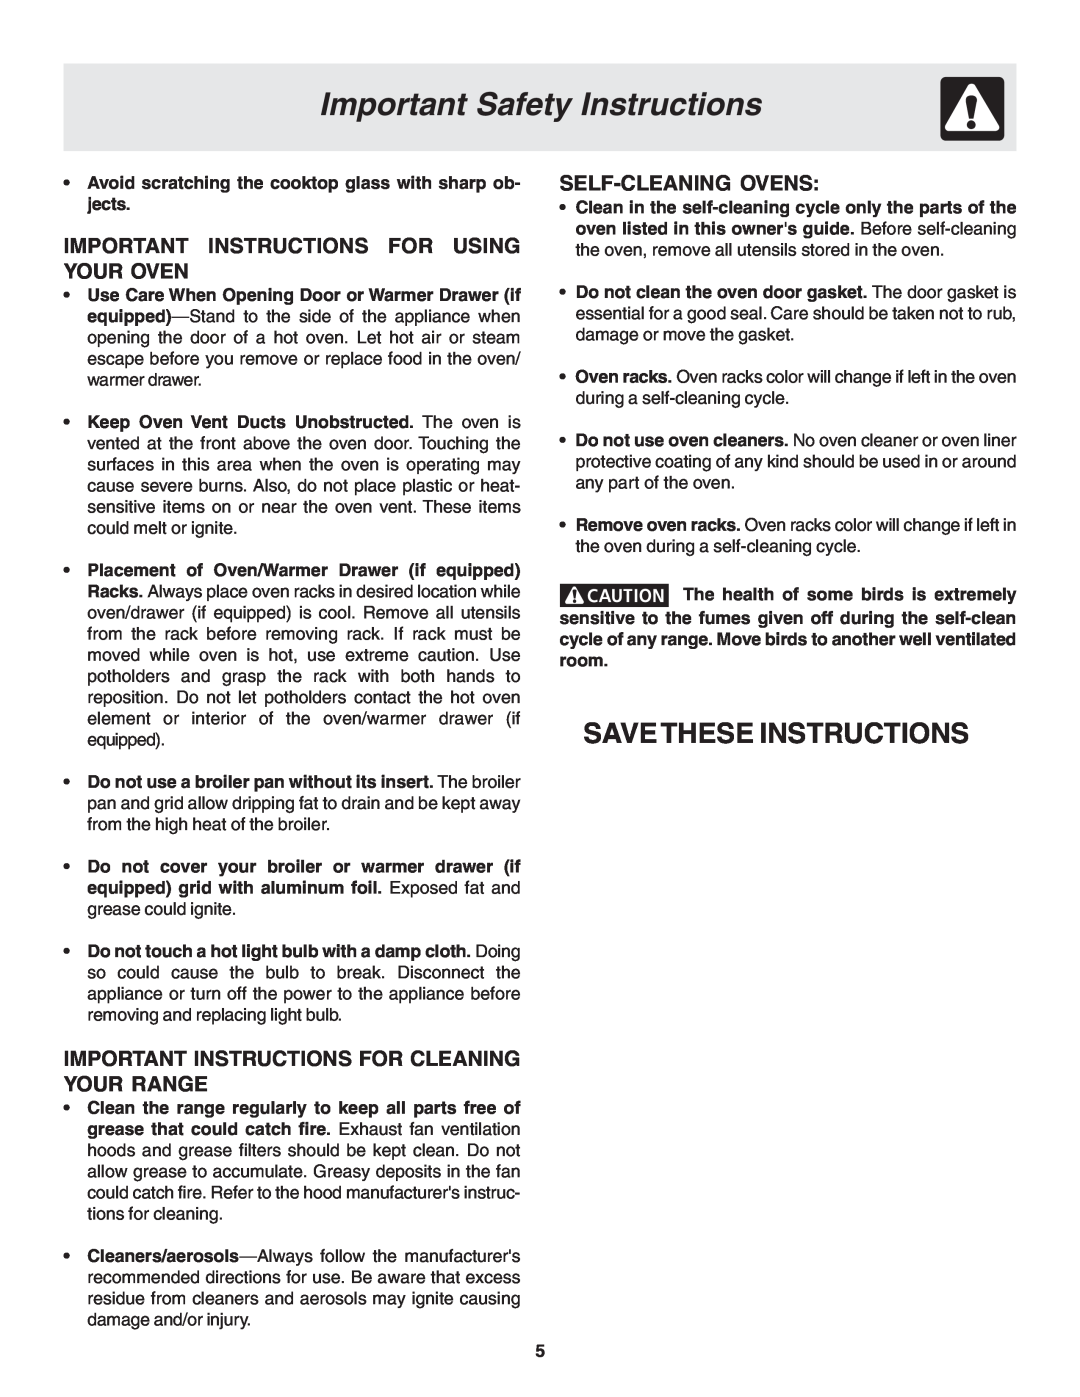 Frigidaire 318203825 warranty Savethese Instructions, Important Instructions For Using Your Oven, Self-Cleaningovens 